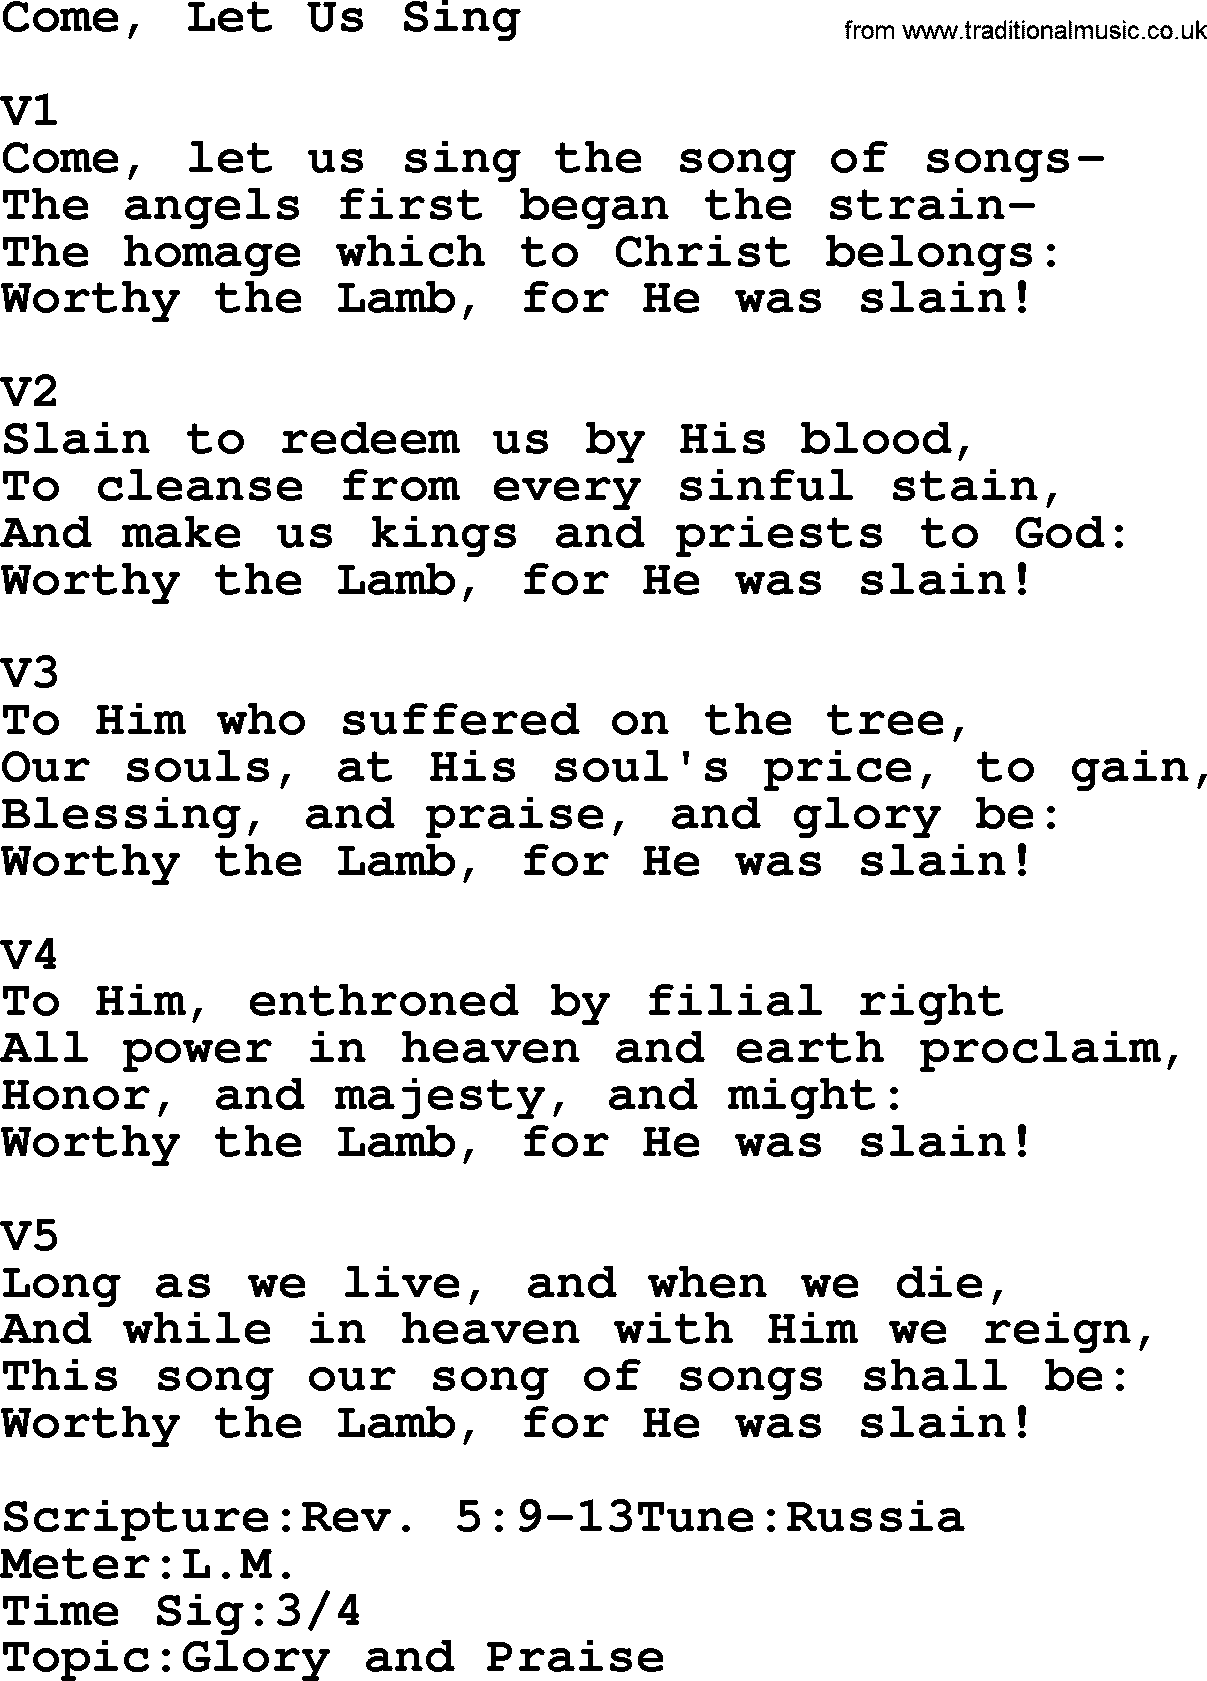 Adventist Hynms collection, Hymn: Come, Let Us Sing, lyrics with PDF